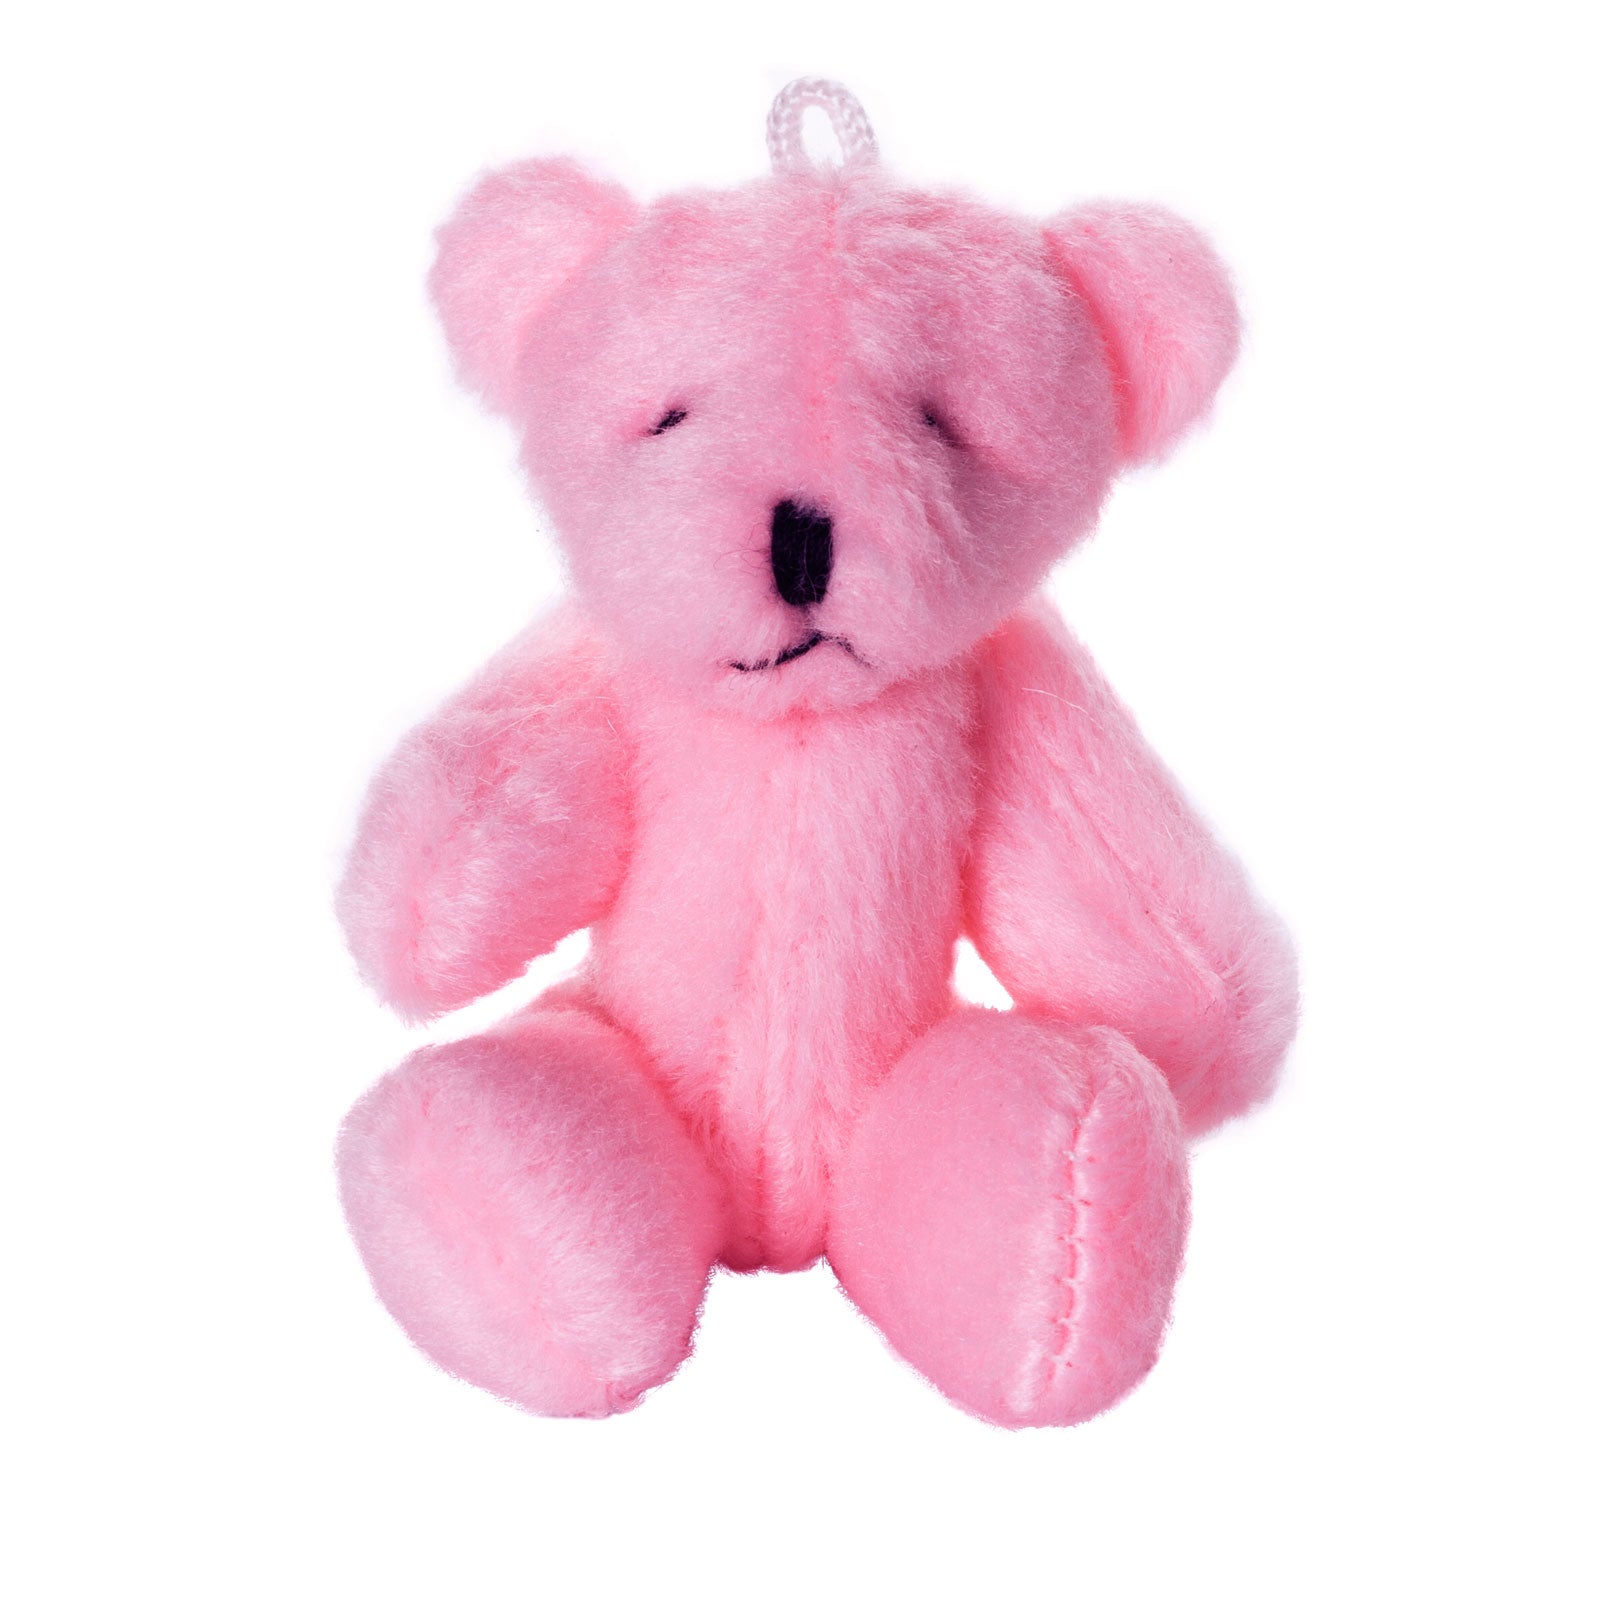 Small PINK Teddy Bears X 65 - Cute Soft Adorable